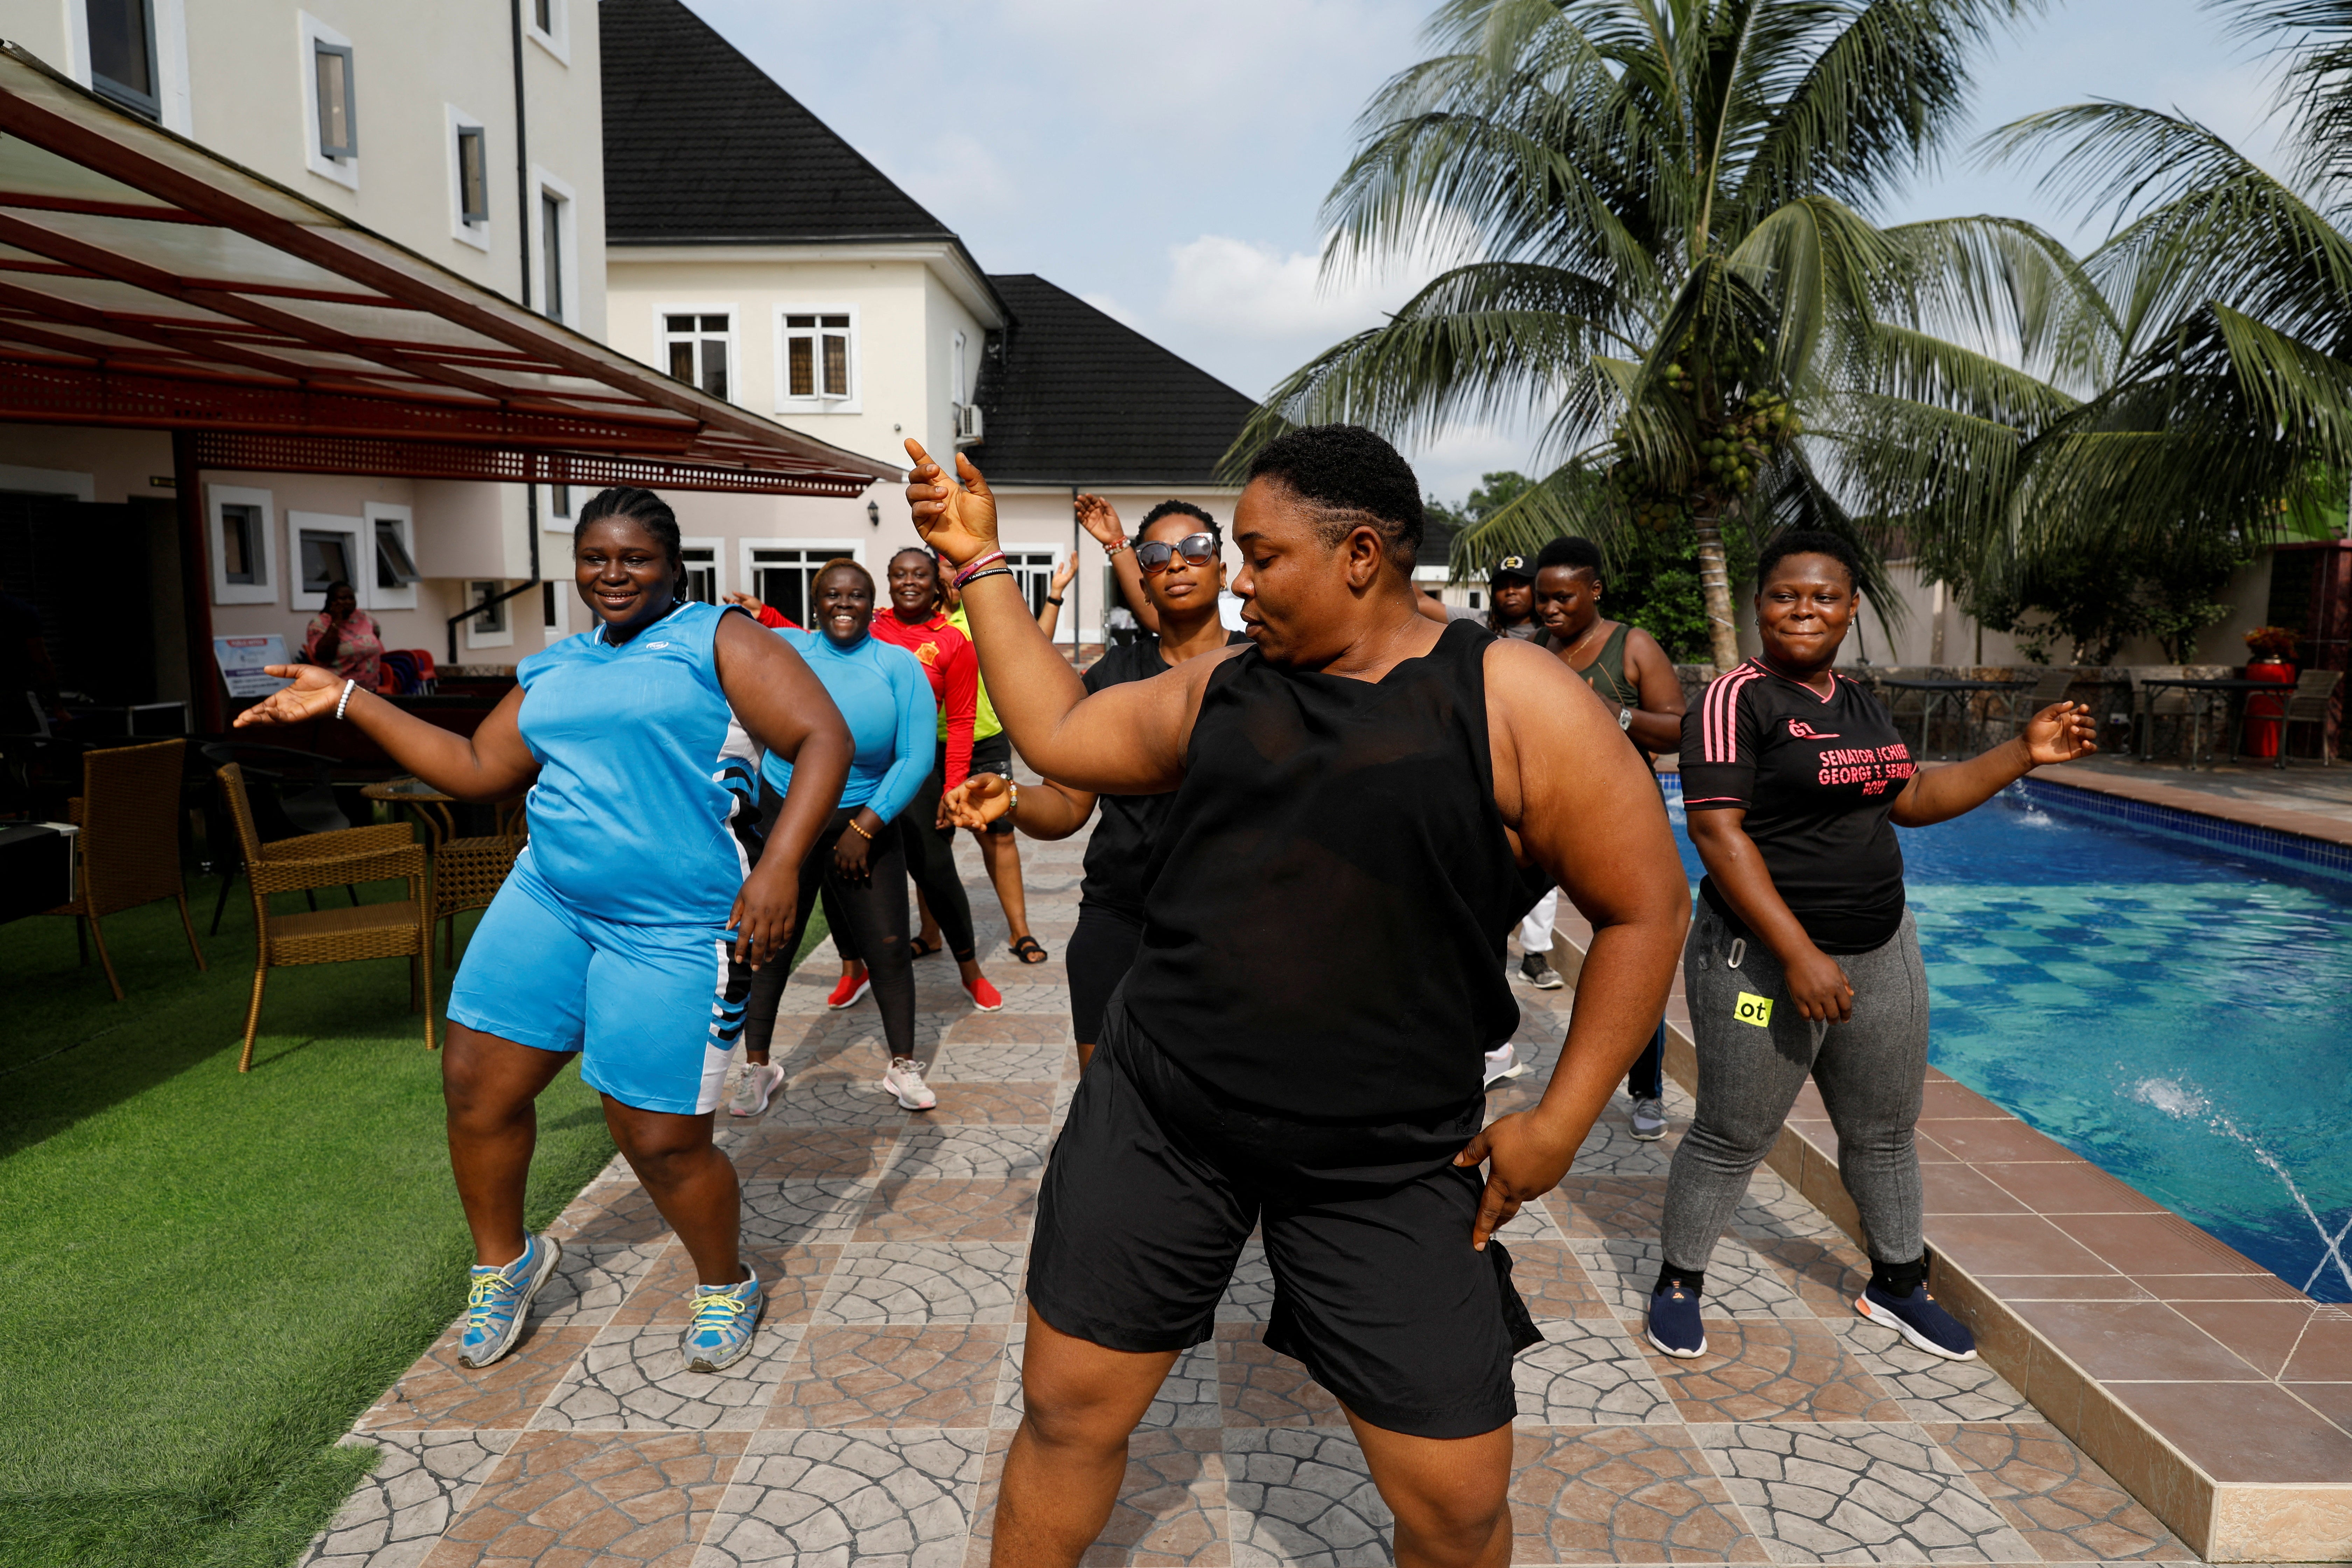 Members of Dragon Squad Limited dance during an exercise session at Camp Gee Hotel